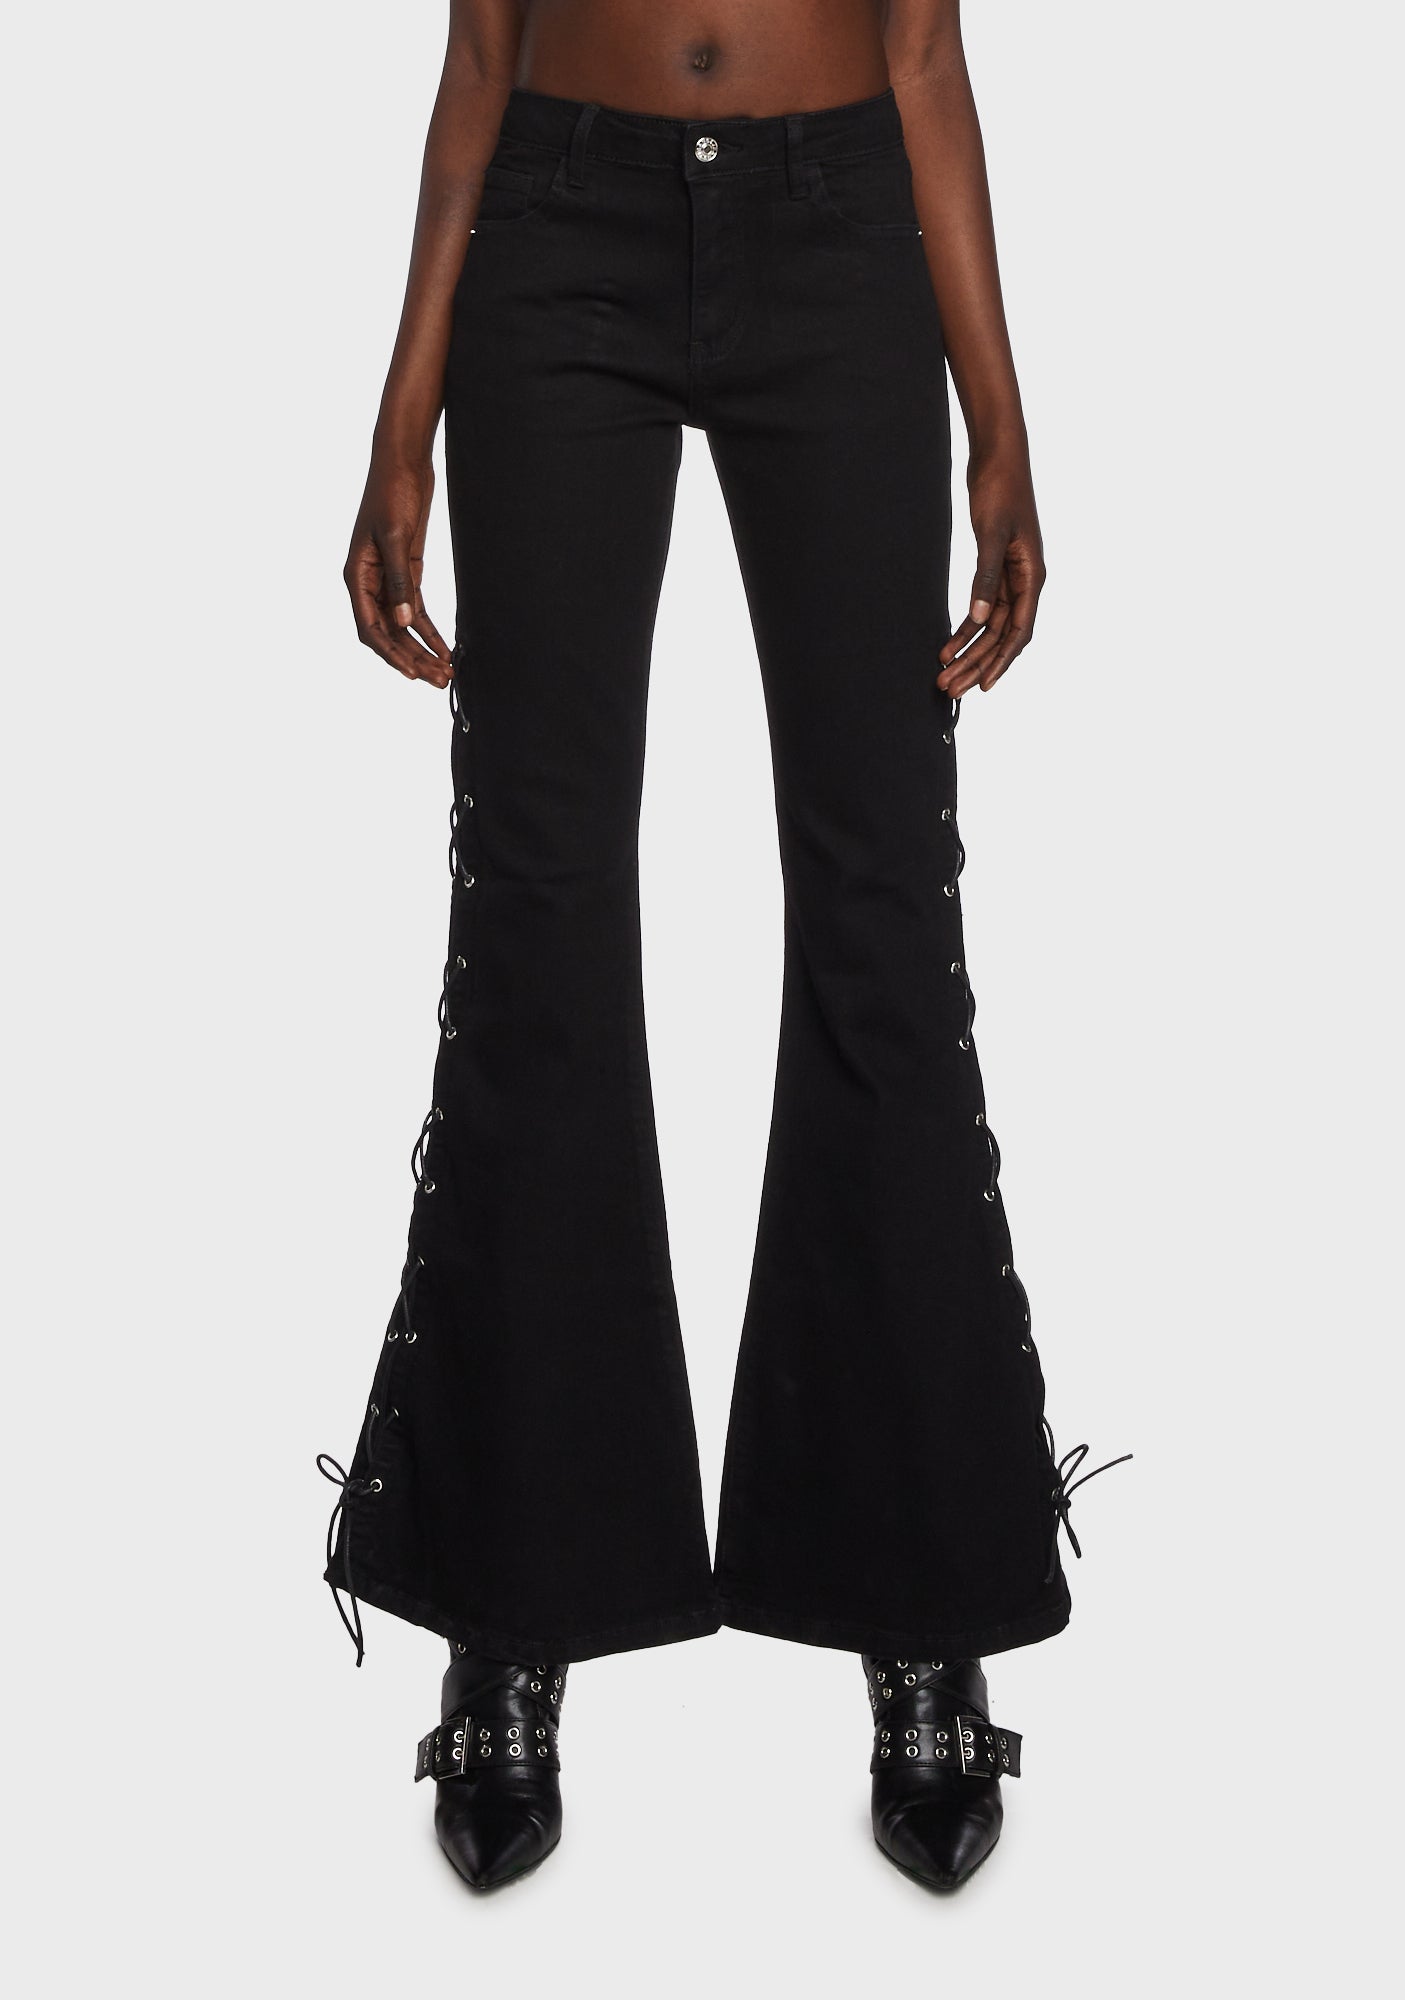 Momokrom Flared Jeans With Side Ties - Black – Dolls Kill